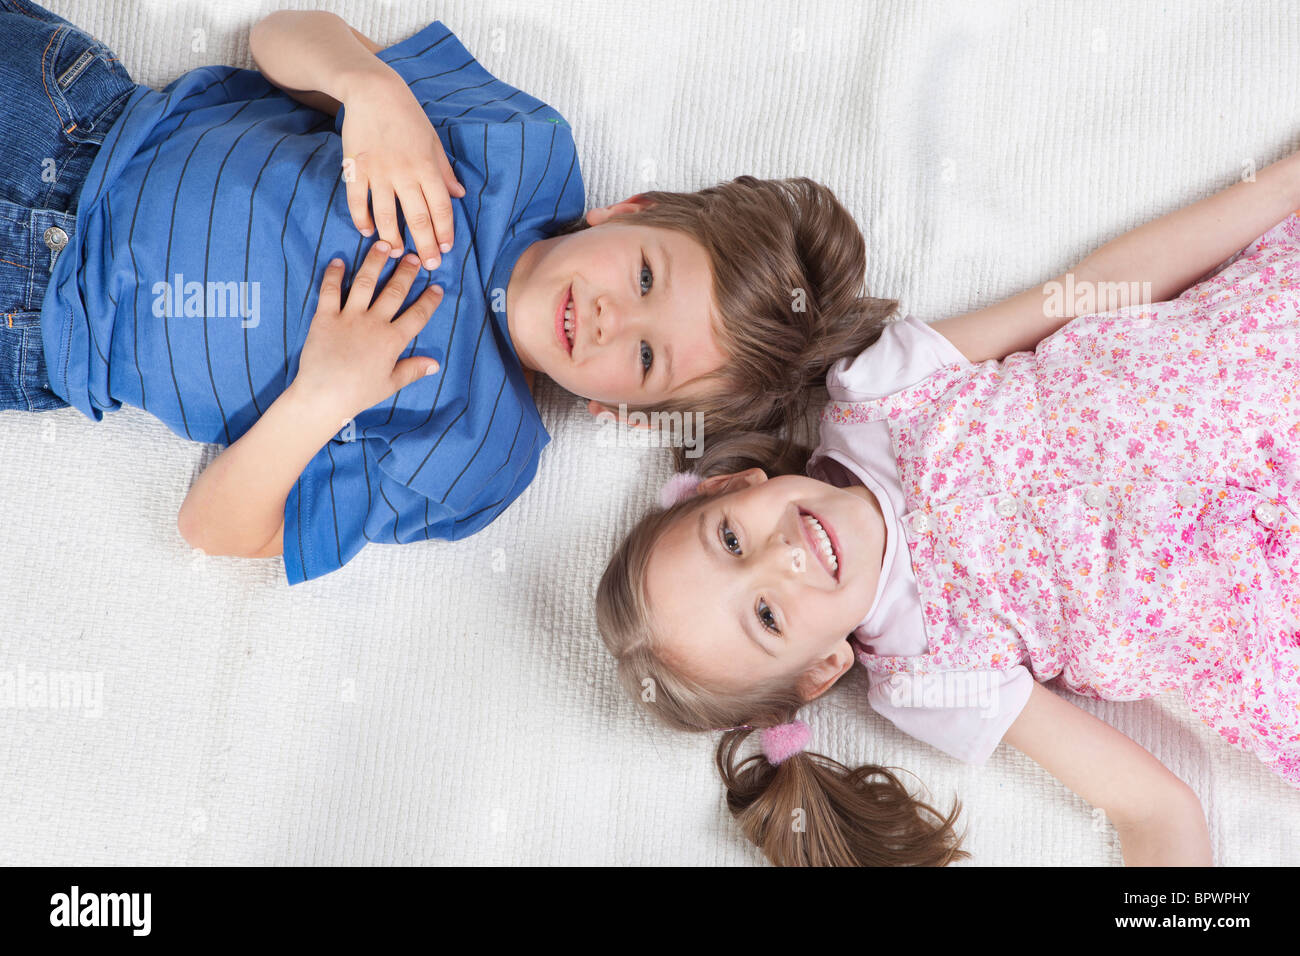 Brother and sister lying on rug Stock Photo